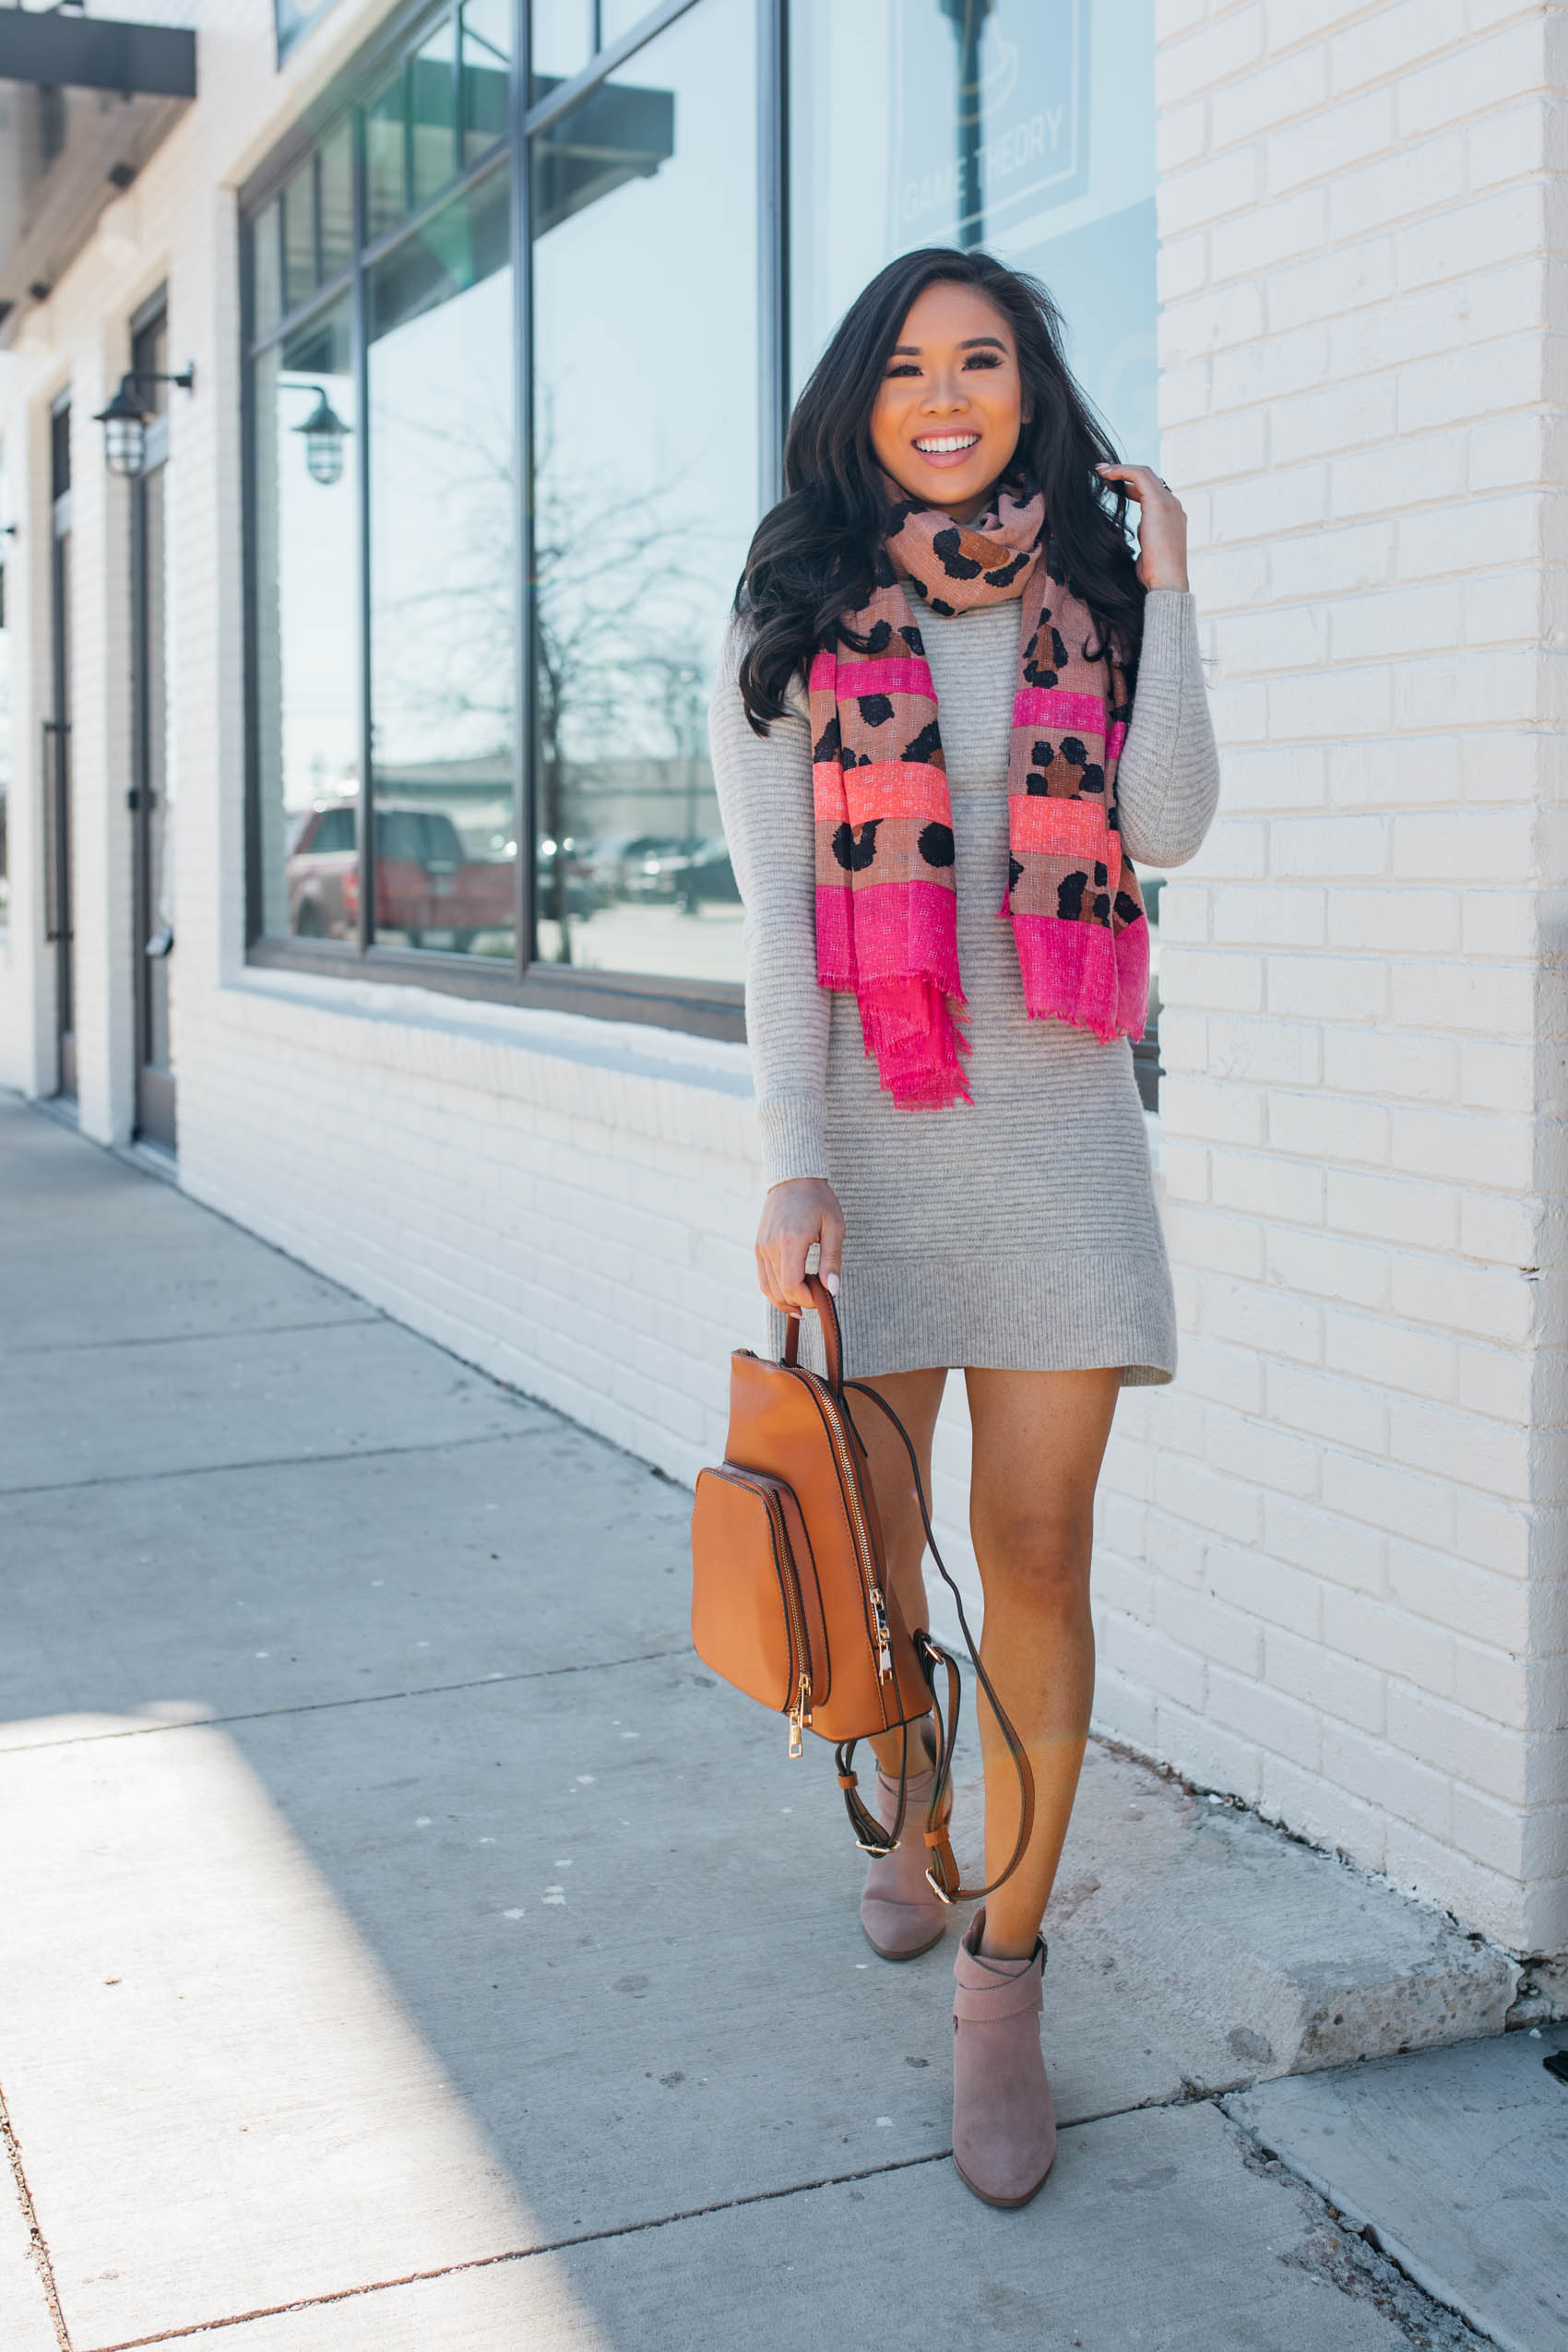 Blogger Hoang-Kim shares a colorful winter outfit idea